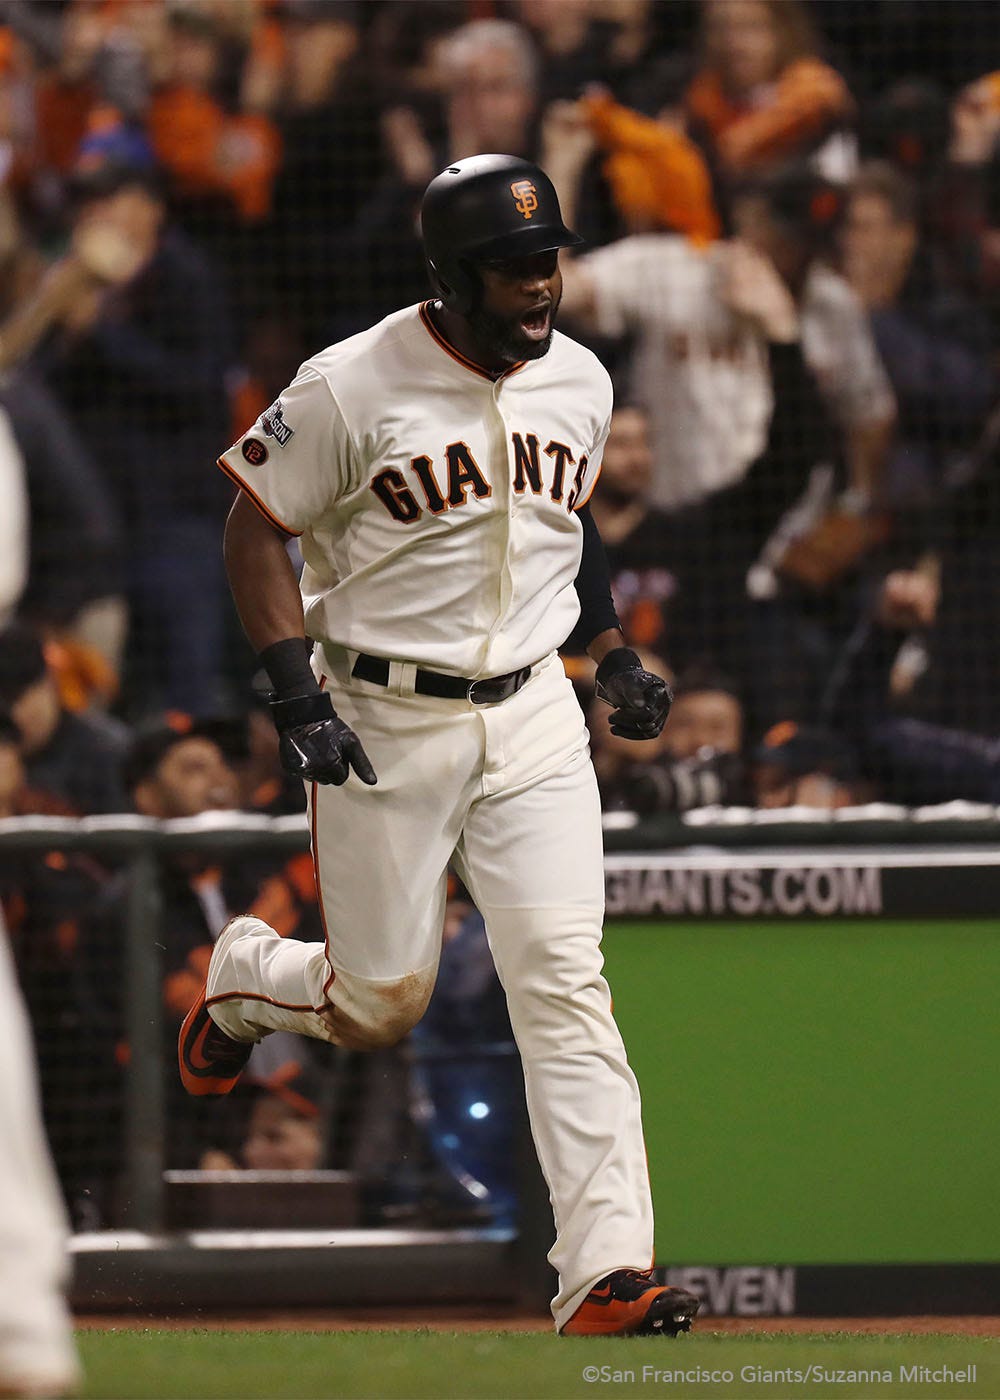 Denard Span celebrates after scoring on a sacrifice fly hit by Brandon Belt during the fifth inning.